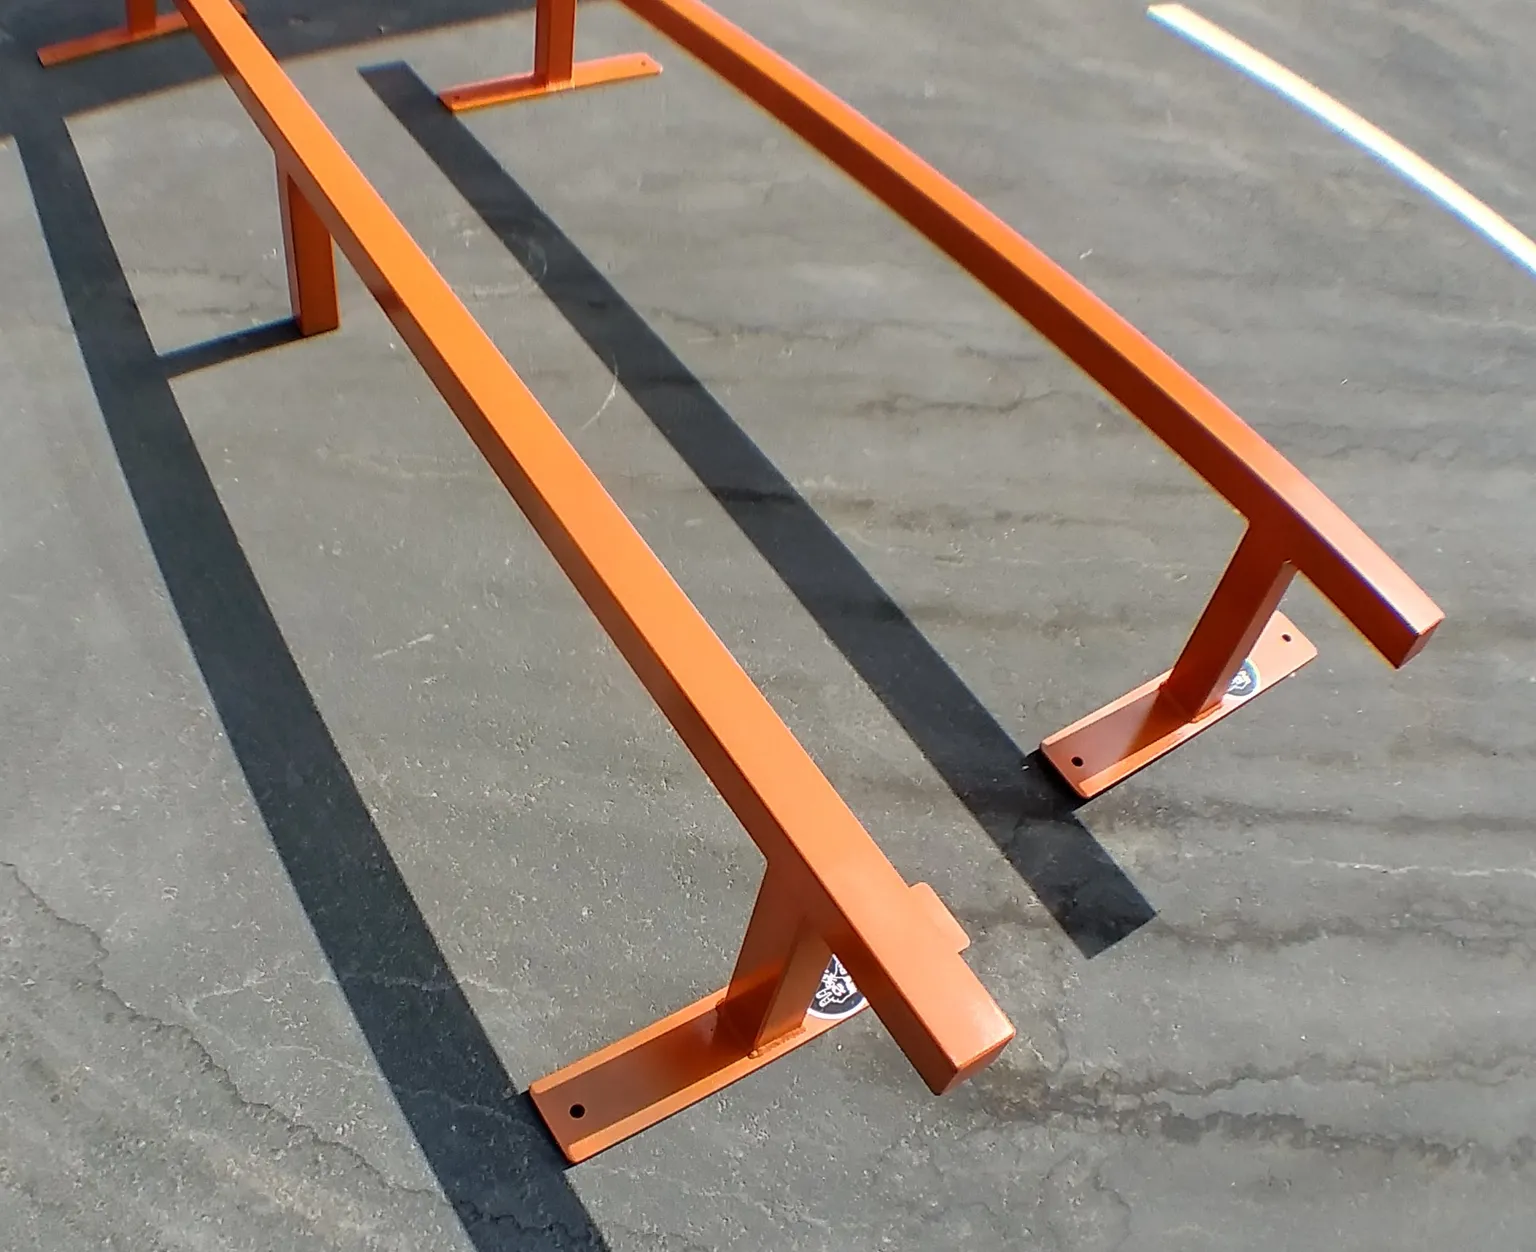 Two orange flat bar skate rails side by side, one foot high by six foot long and one foot high by eight foot long, secondary angle